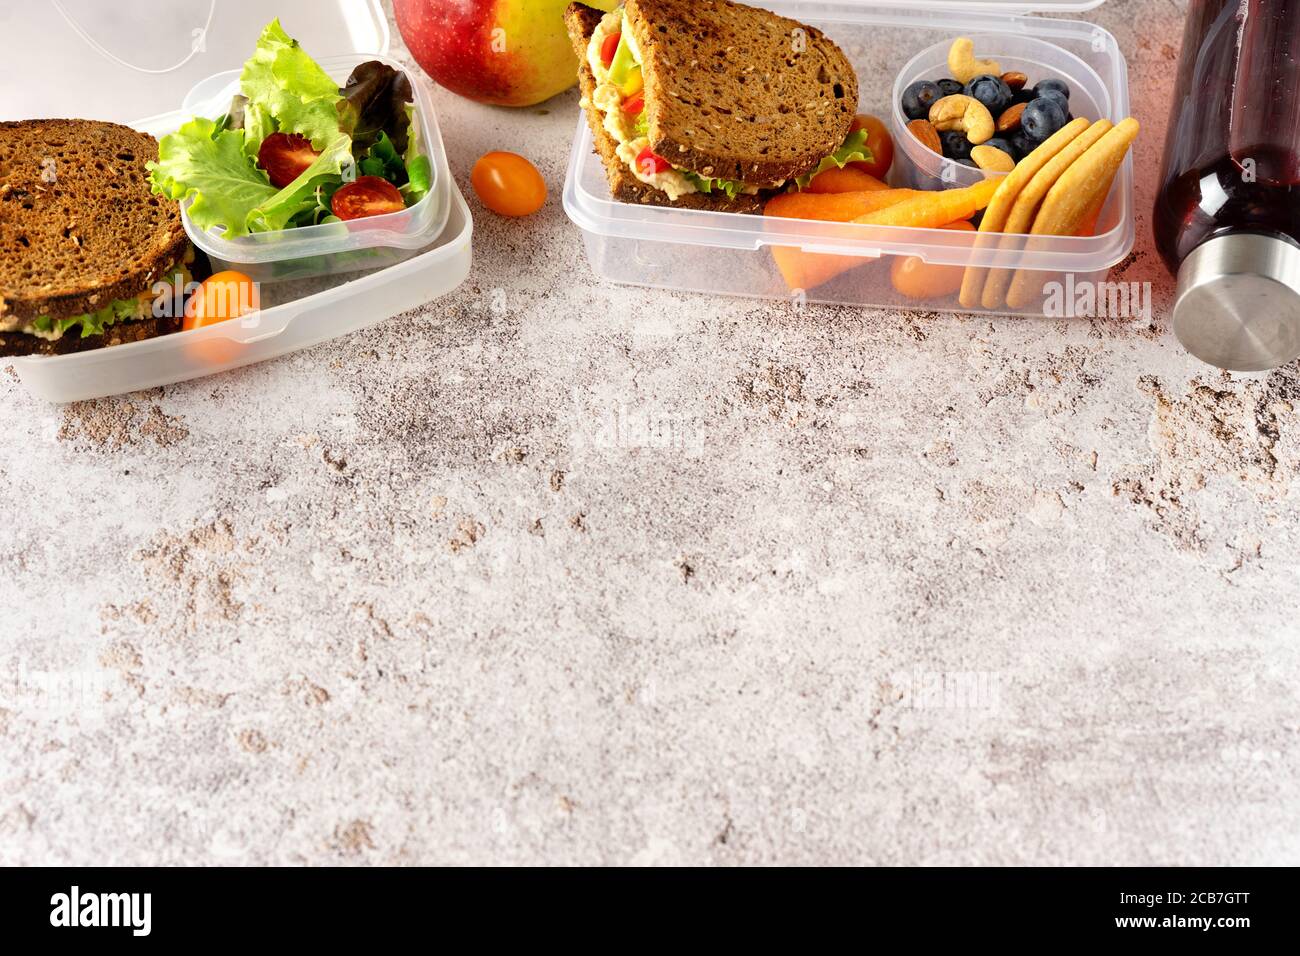 Top view of boxes with vegan healthy school lunches Stock Photo